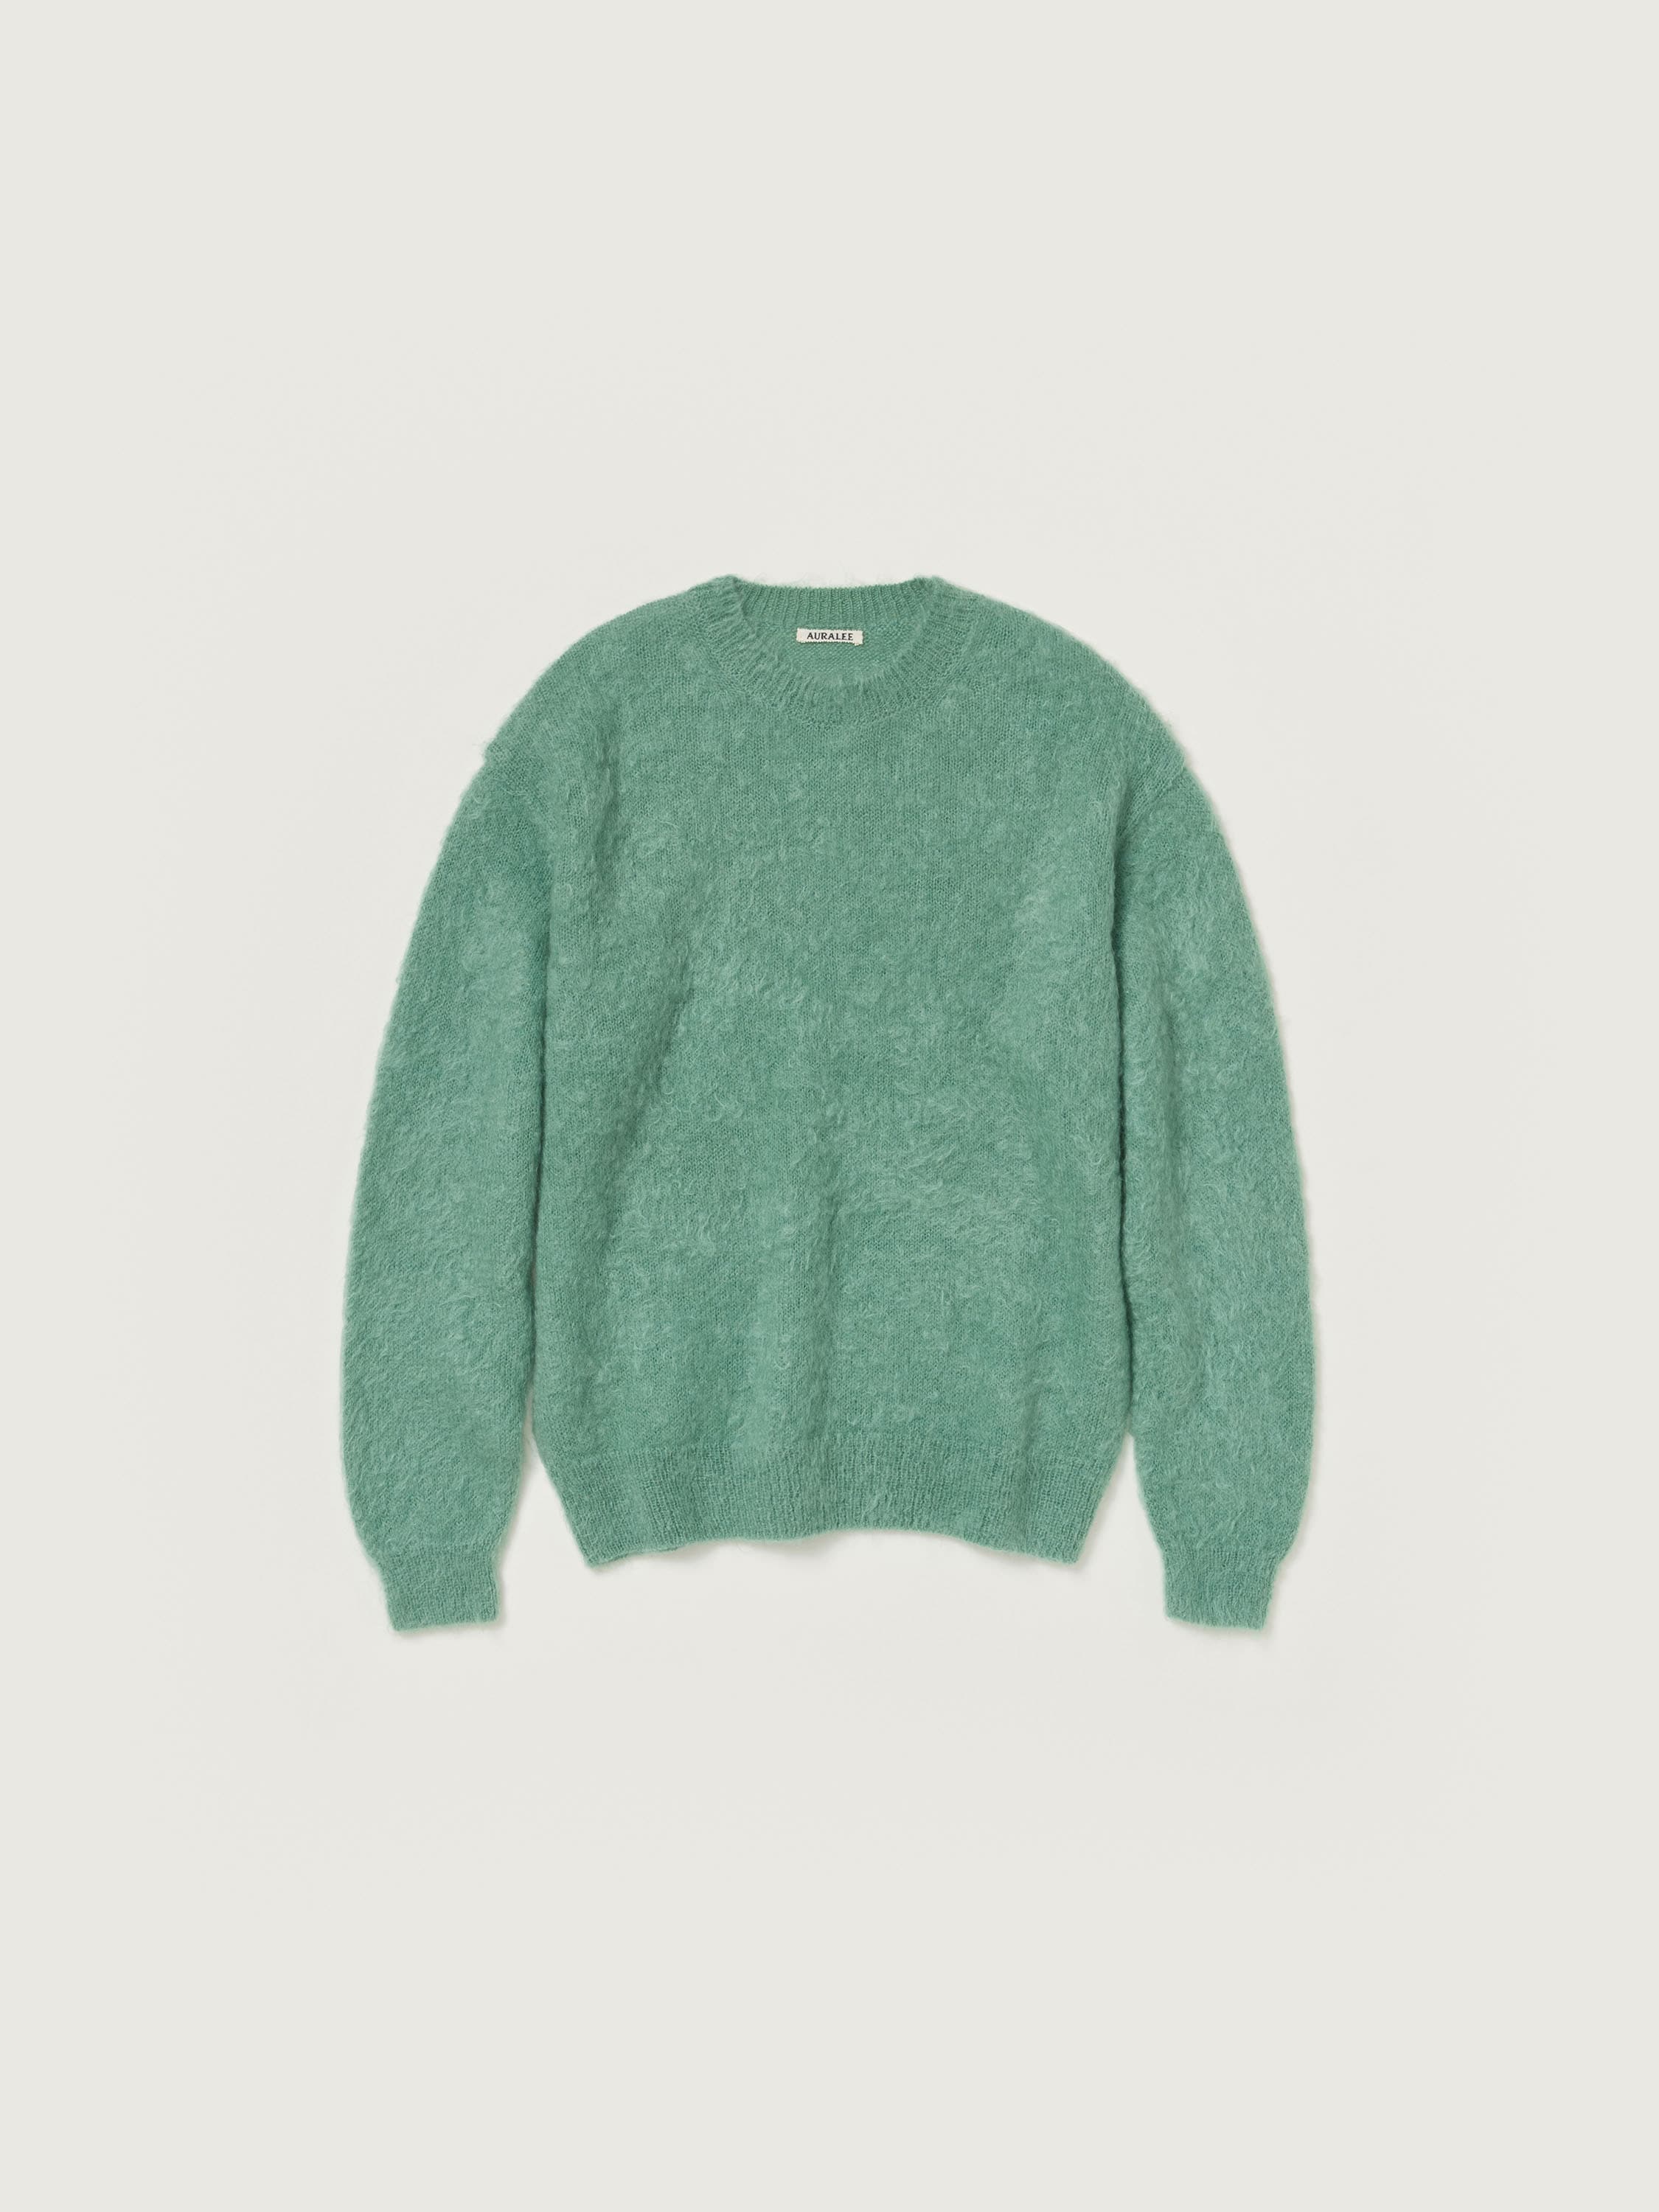 BRUSHED SUPER KID MOHAIR KNIT P/O 詳細画像 JADE GREEN 1